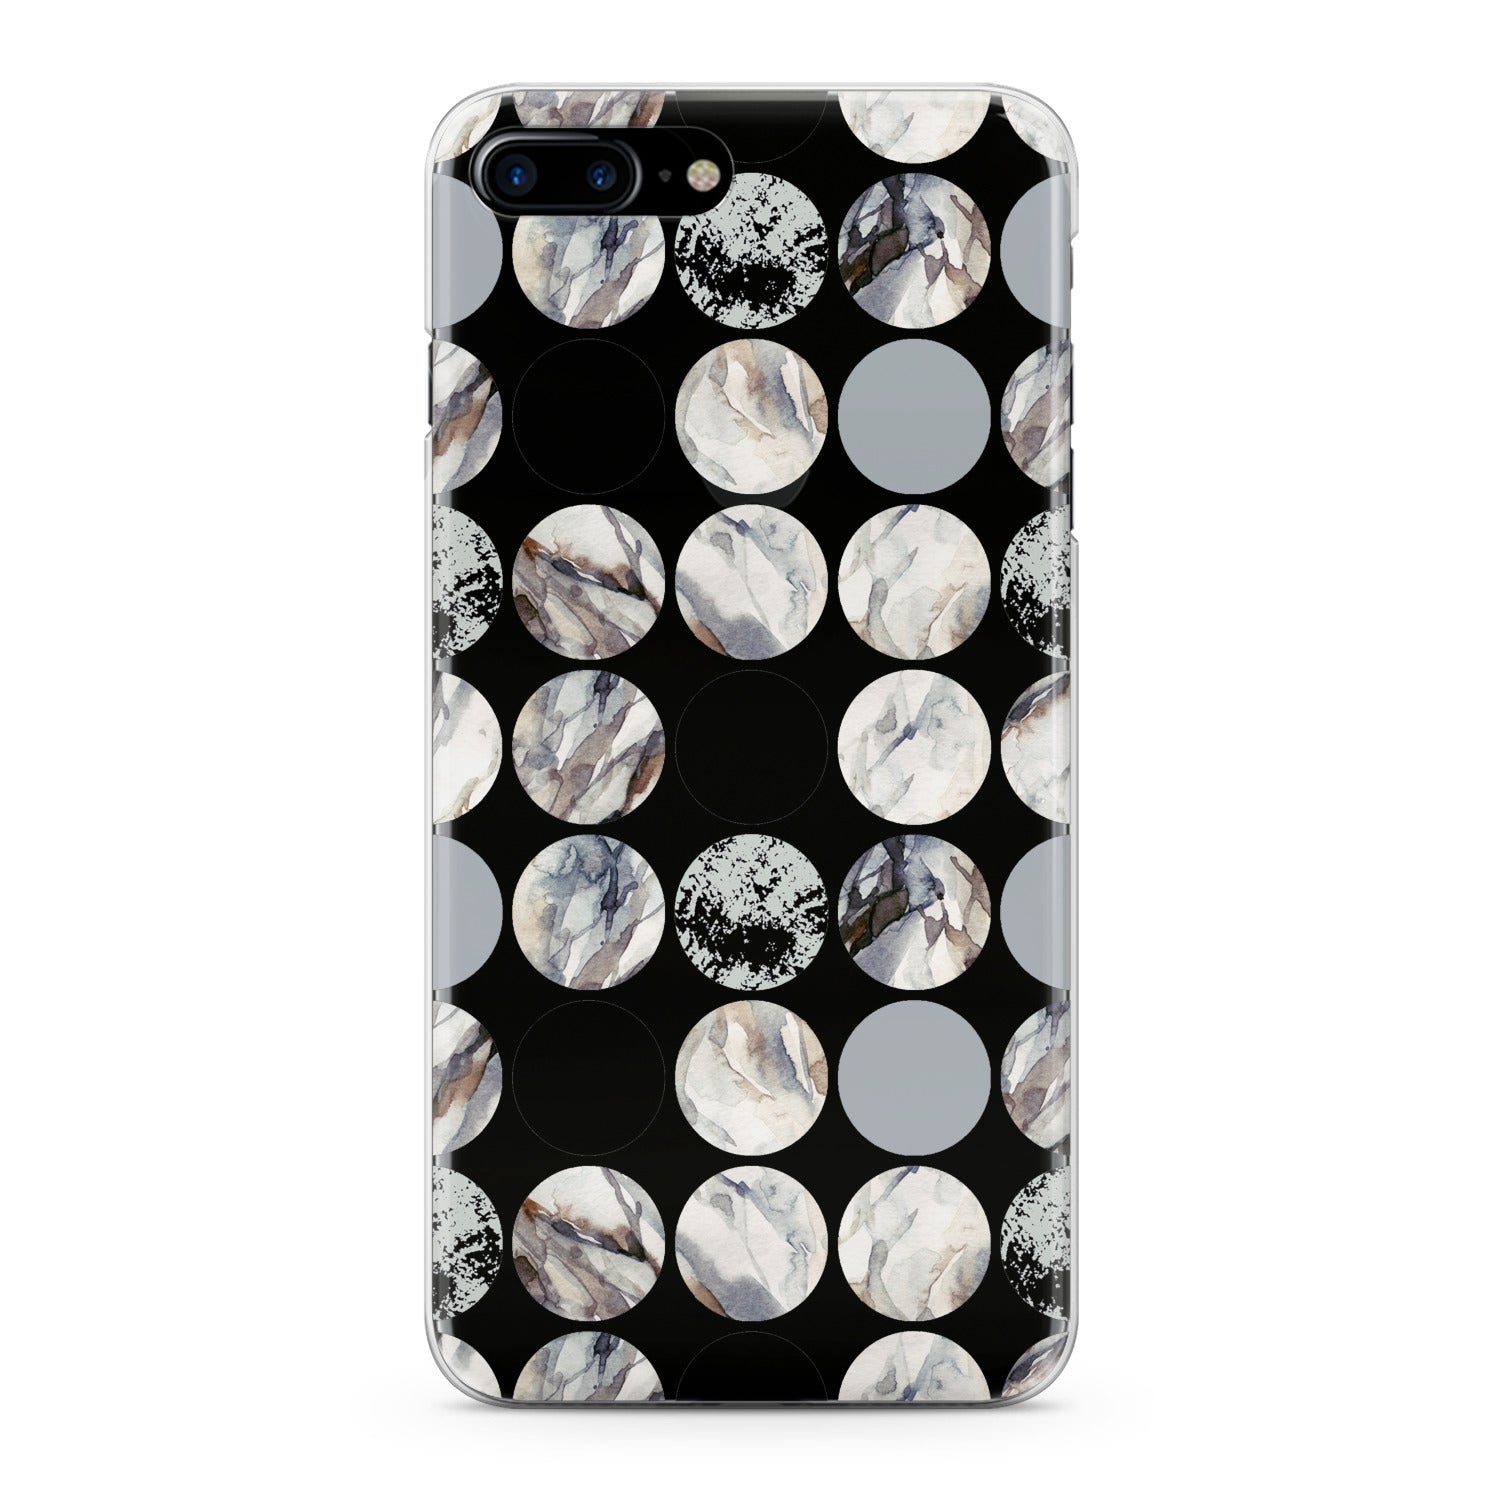 Lex Altern Watercolor Circles Phone Case for your iPhone & Android phone.